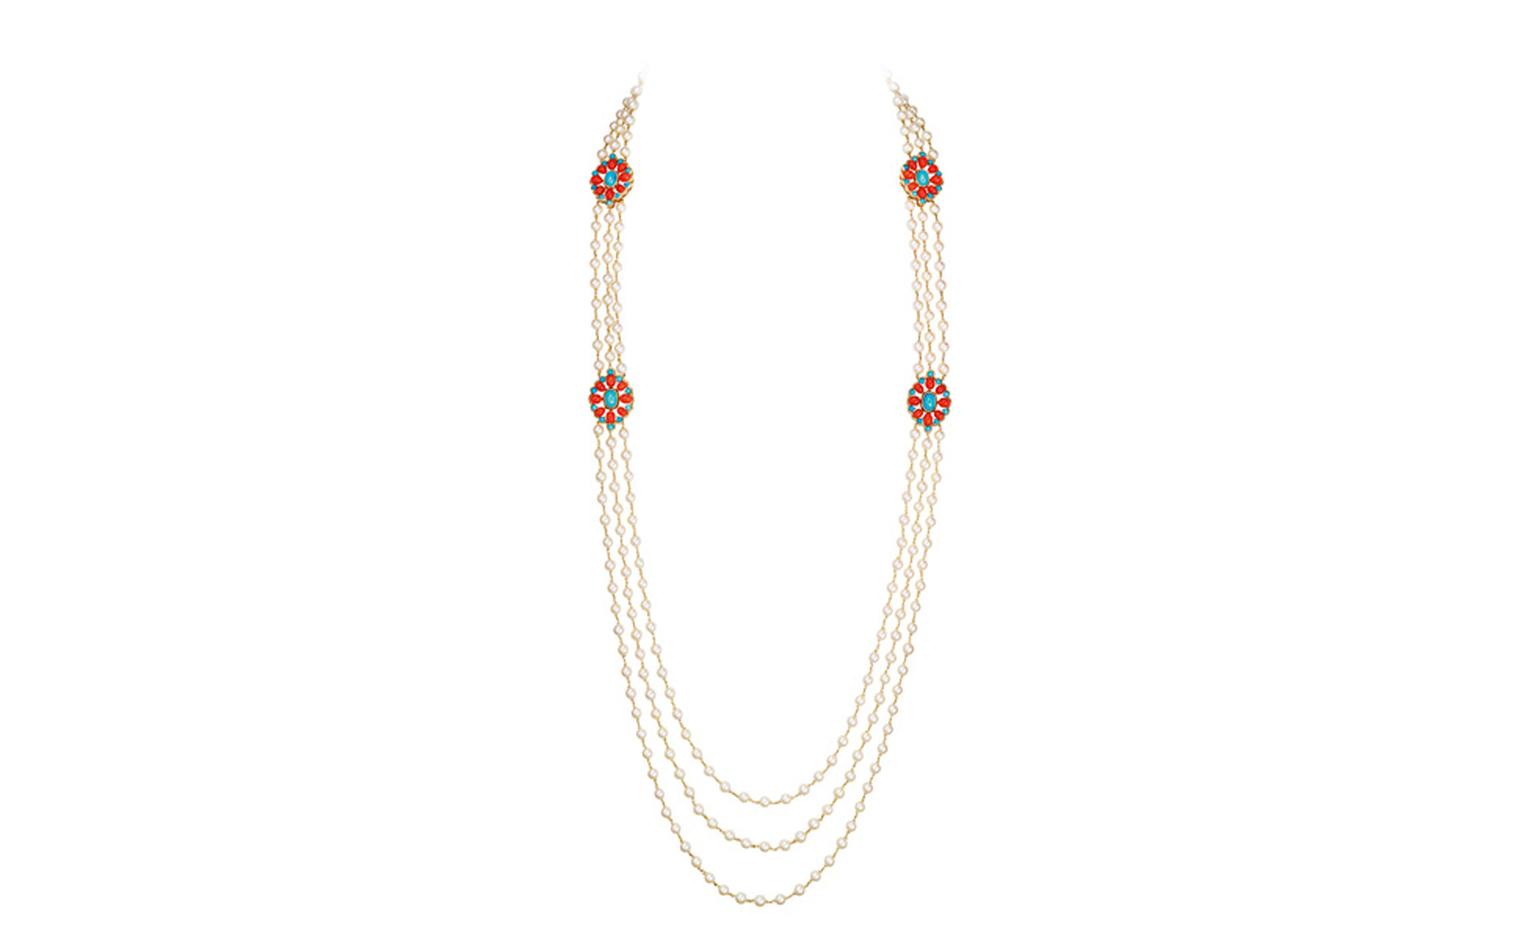 BOUCHERON. Paraggi necklace, set with round cultured pearls, round turquoise and oval red corals, on pink gold. POA